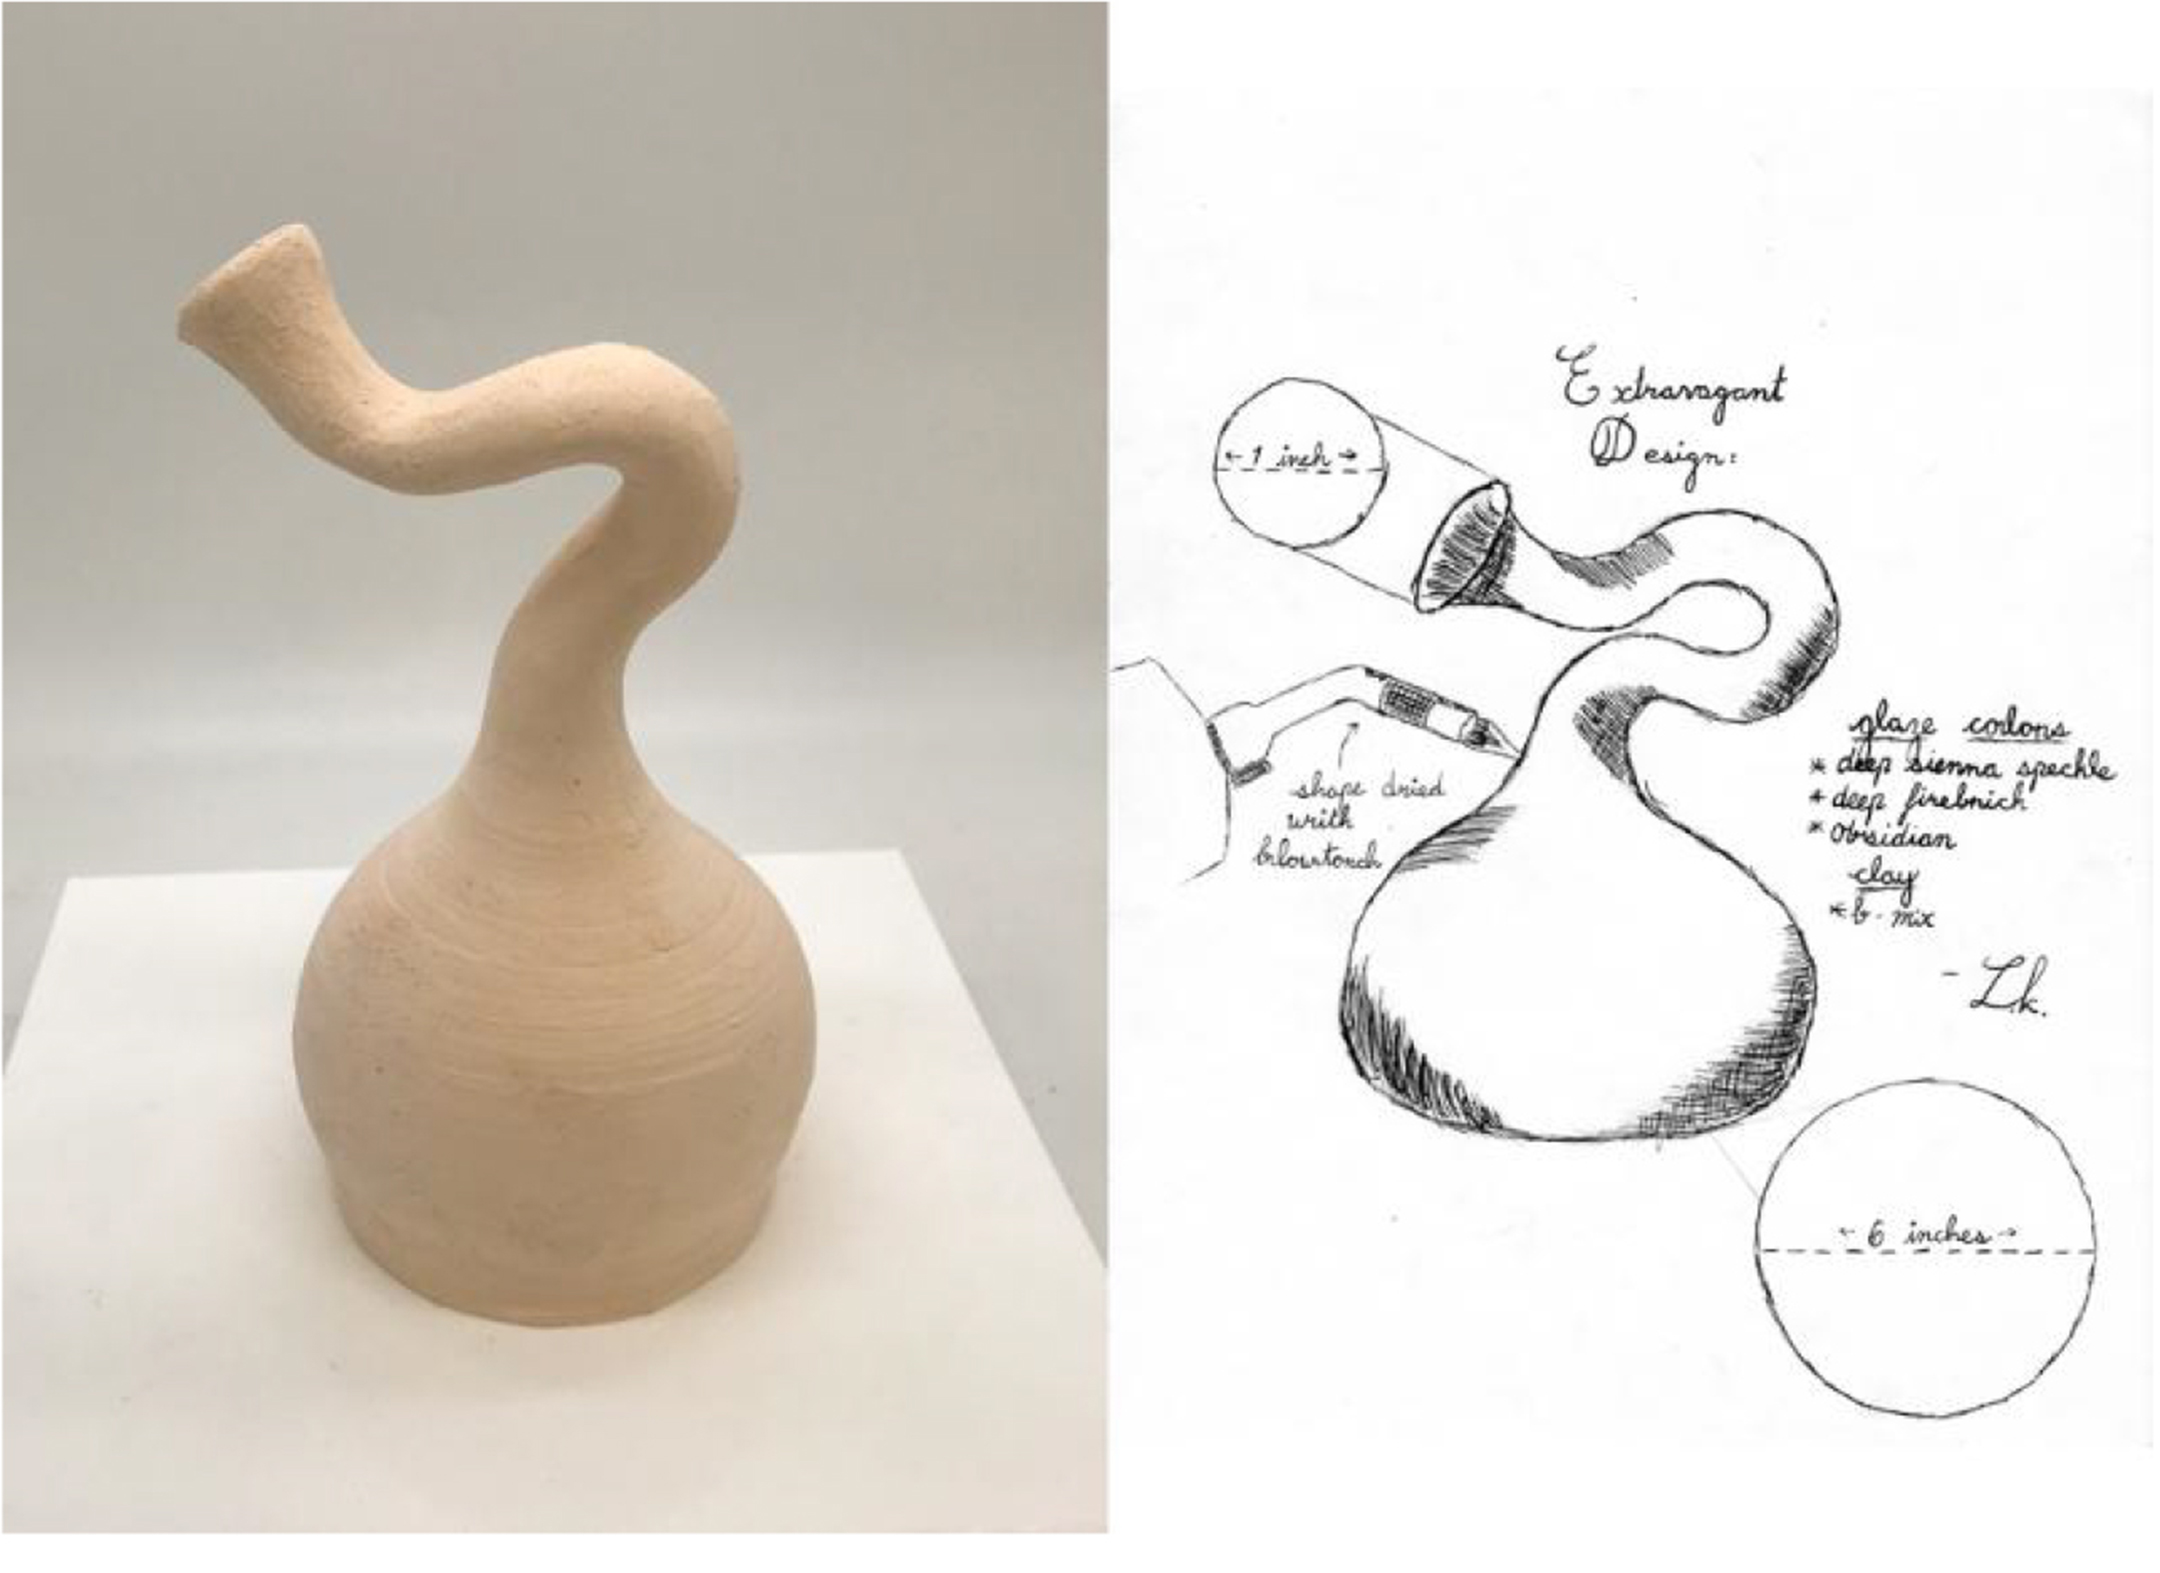 bottle with a twisty neck on the left, sketch of the bottle on the right